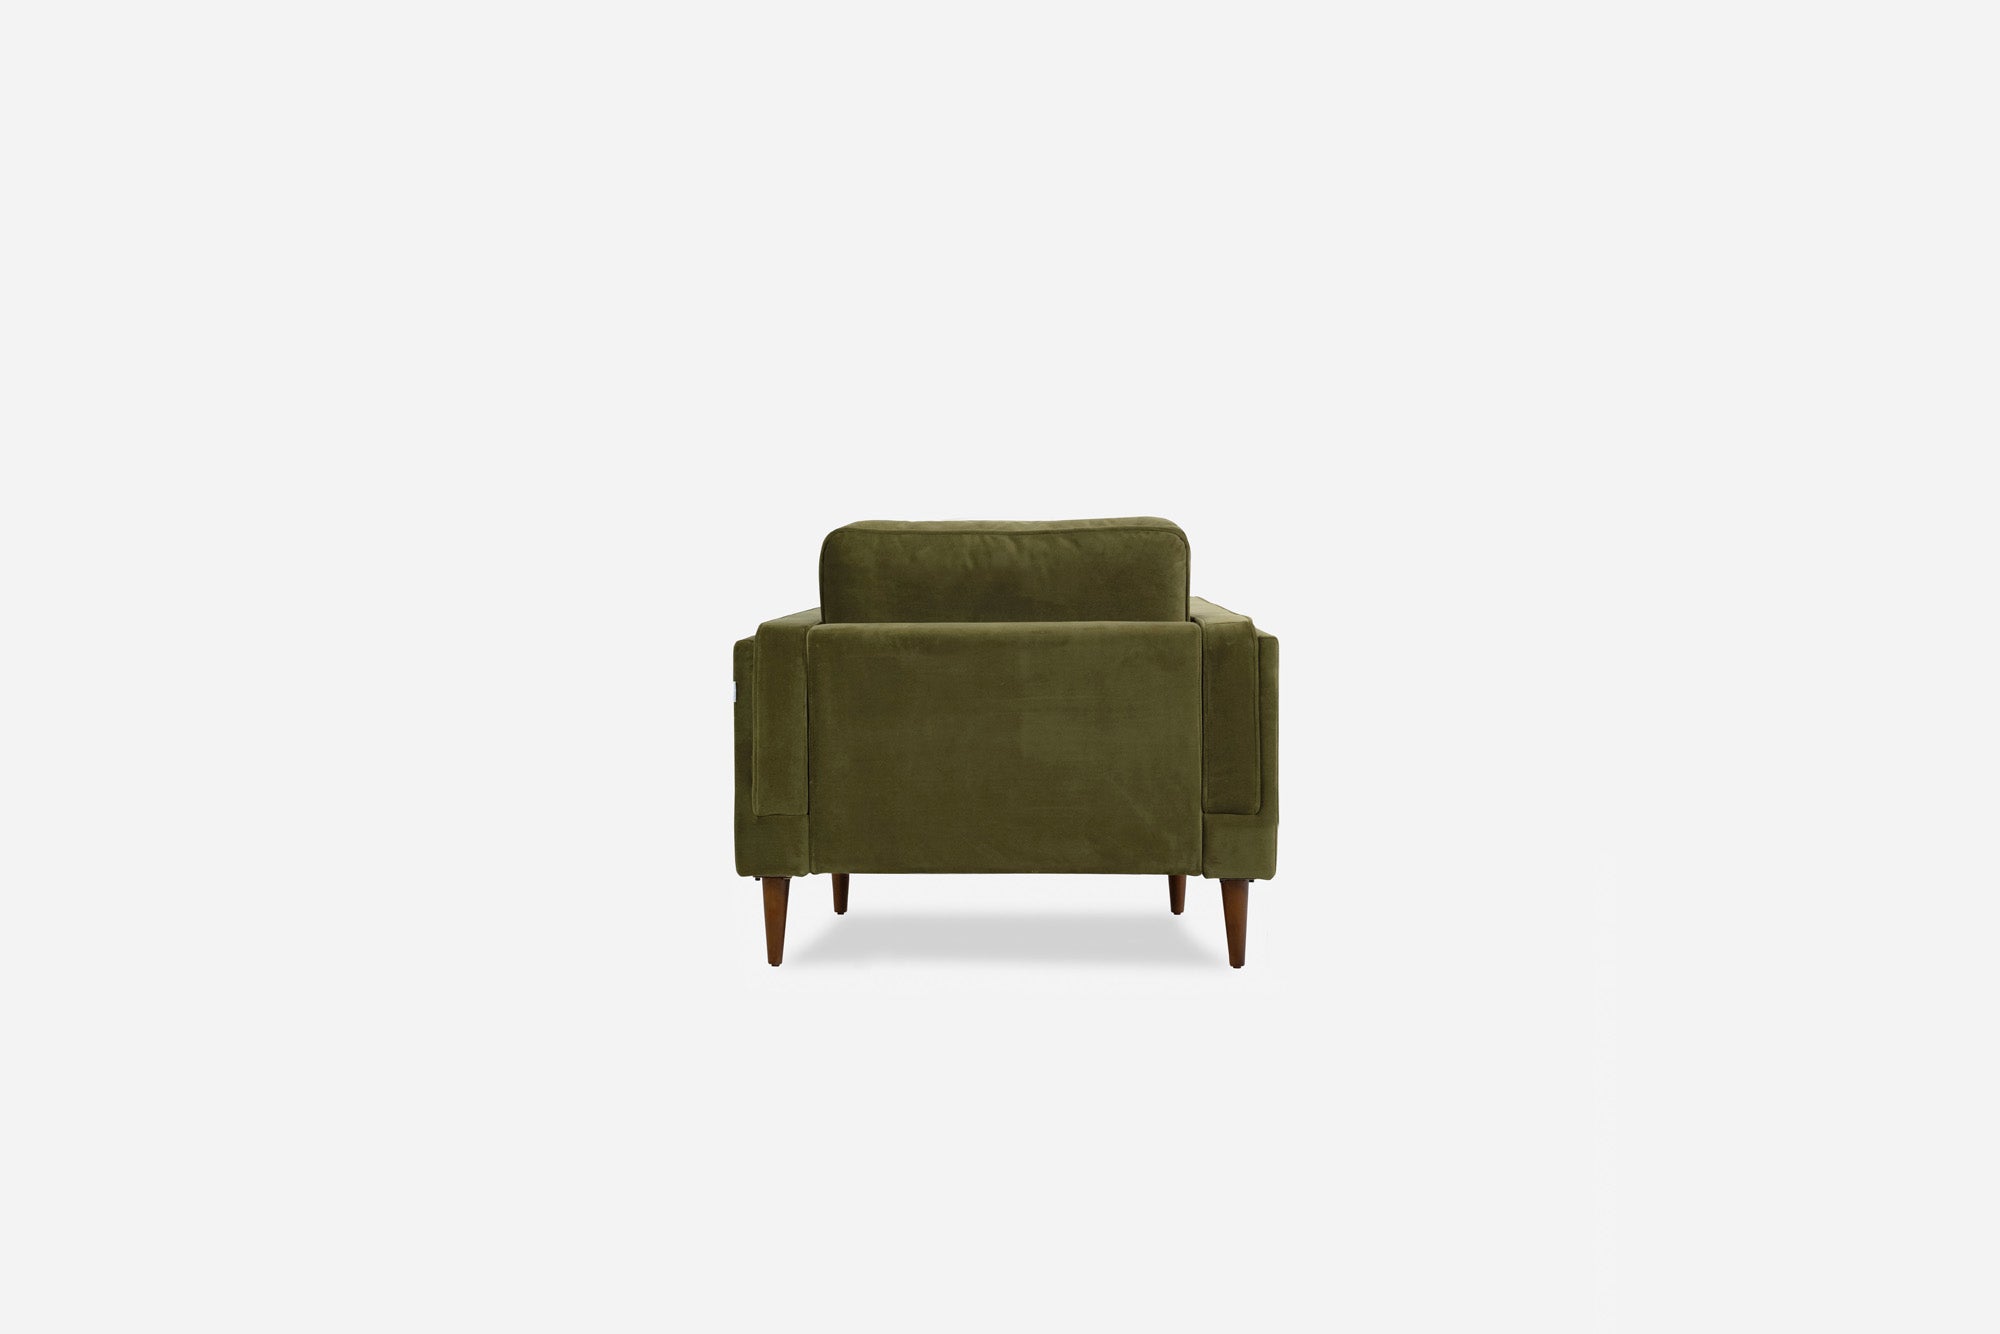 albany armchair shown in olive velvet with walnut legs